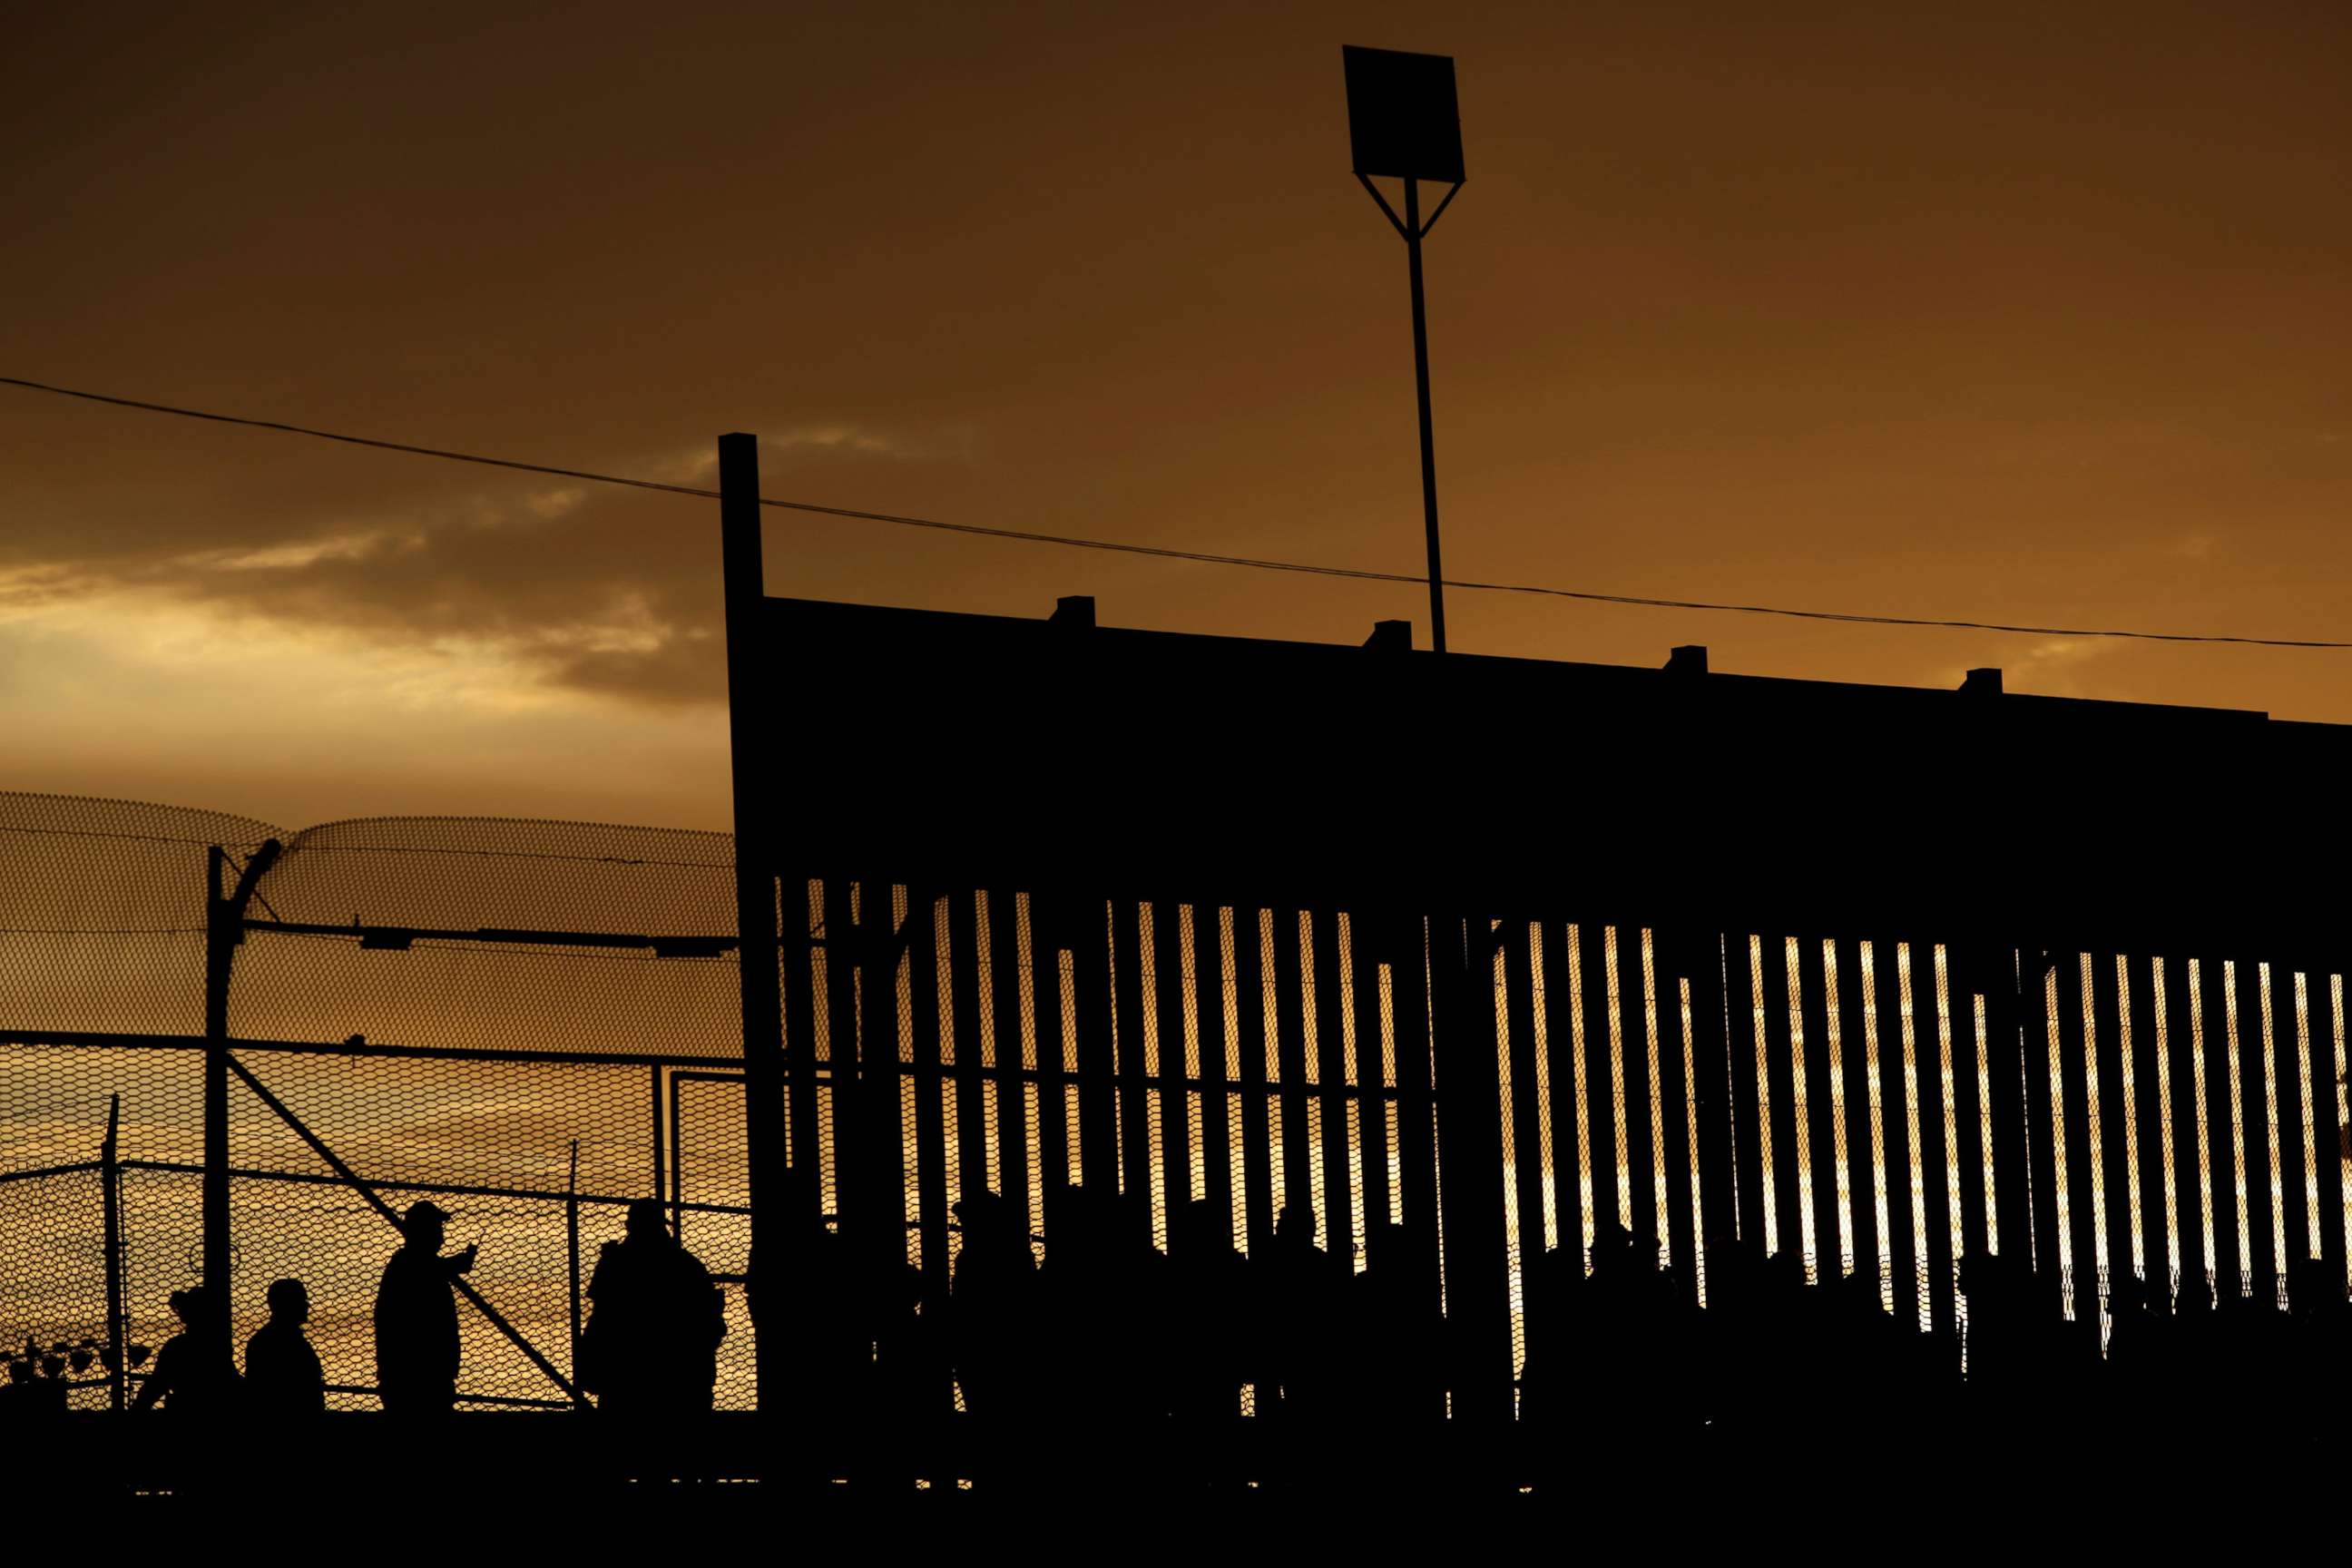 PHOTO: Migrants listen to U.S. Customs and Border Protection officials after crossing illegally into the United States to request asylum in El Paso, Texas, April 5, 2019.